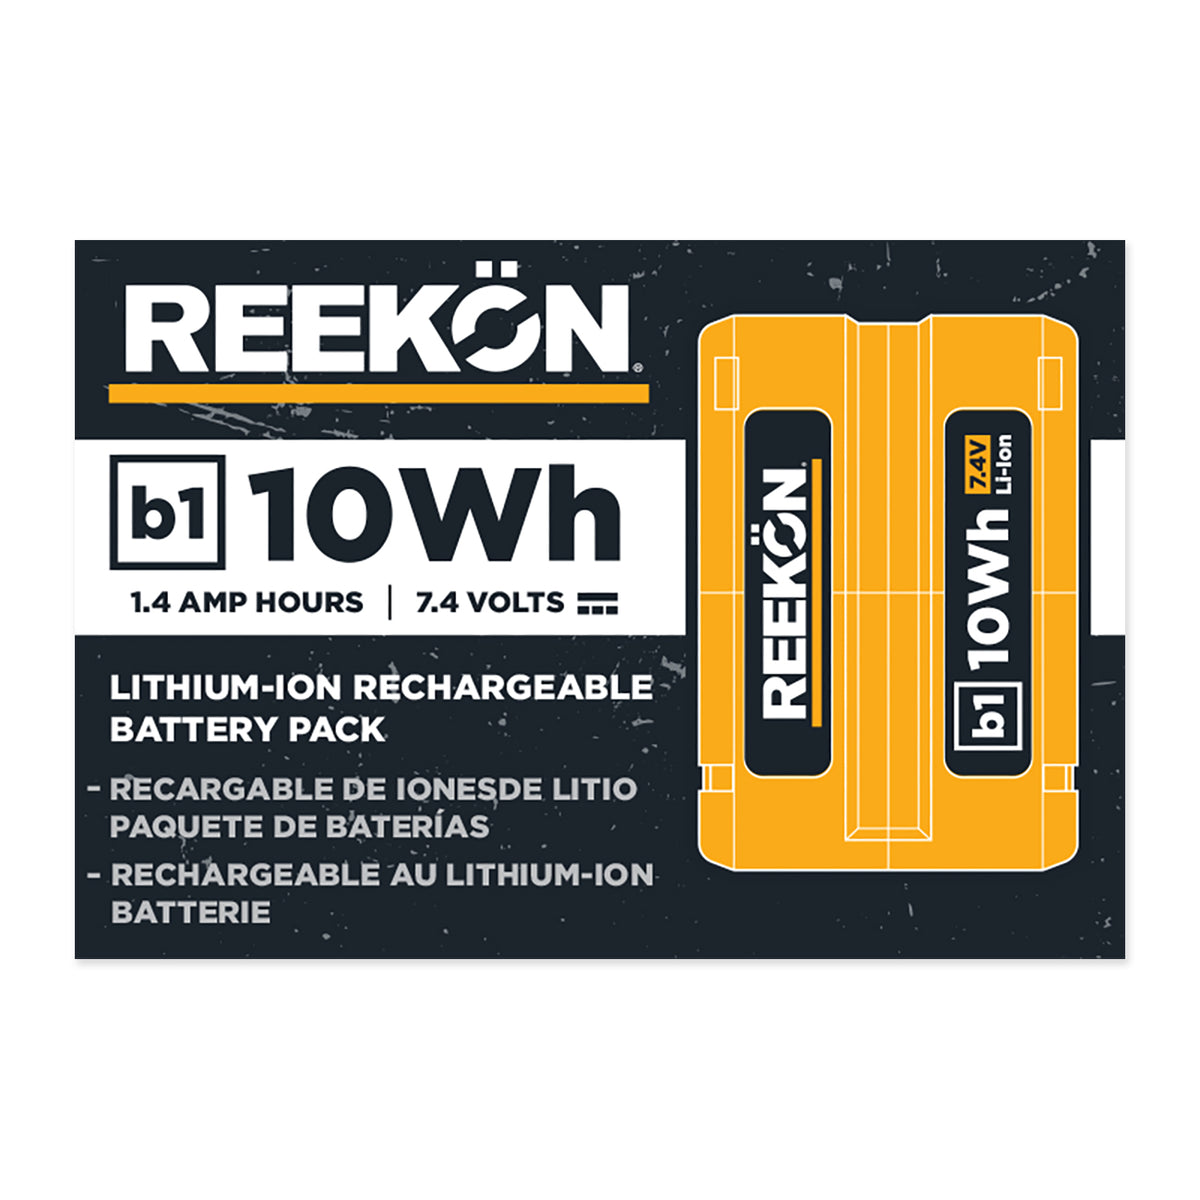 b1 10Wh Rechargeable Battery — REEKON Tools